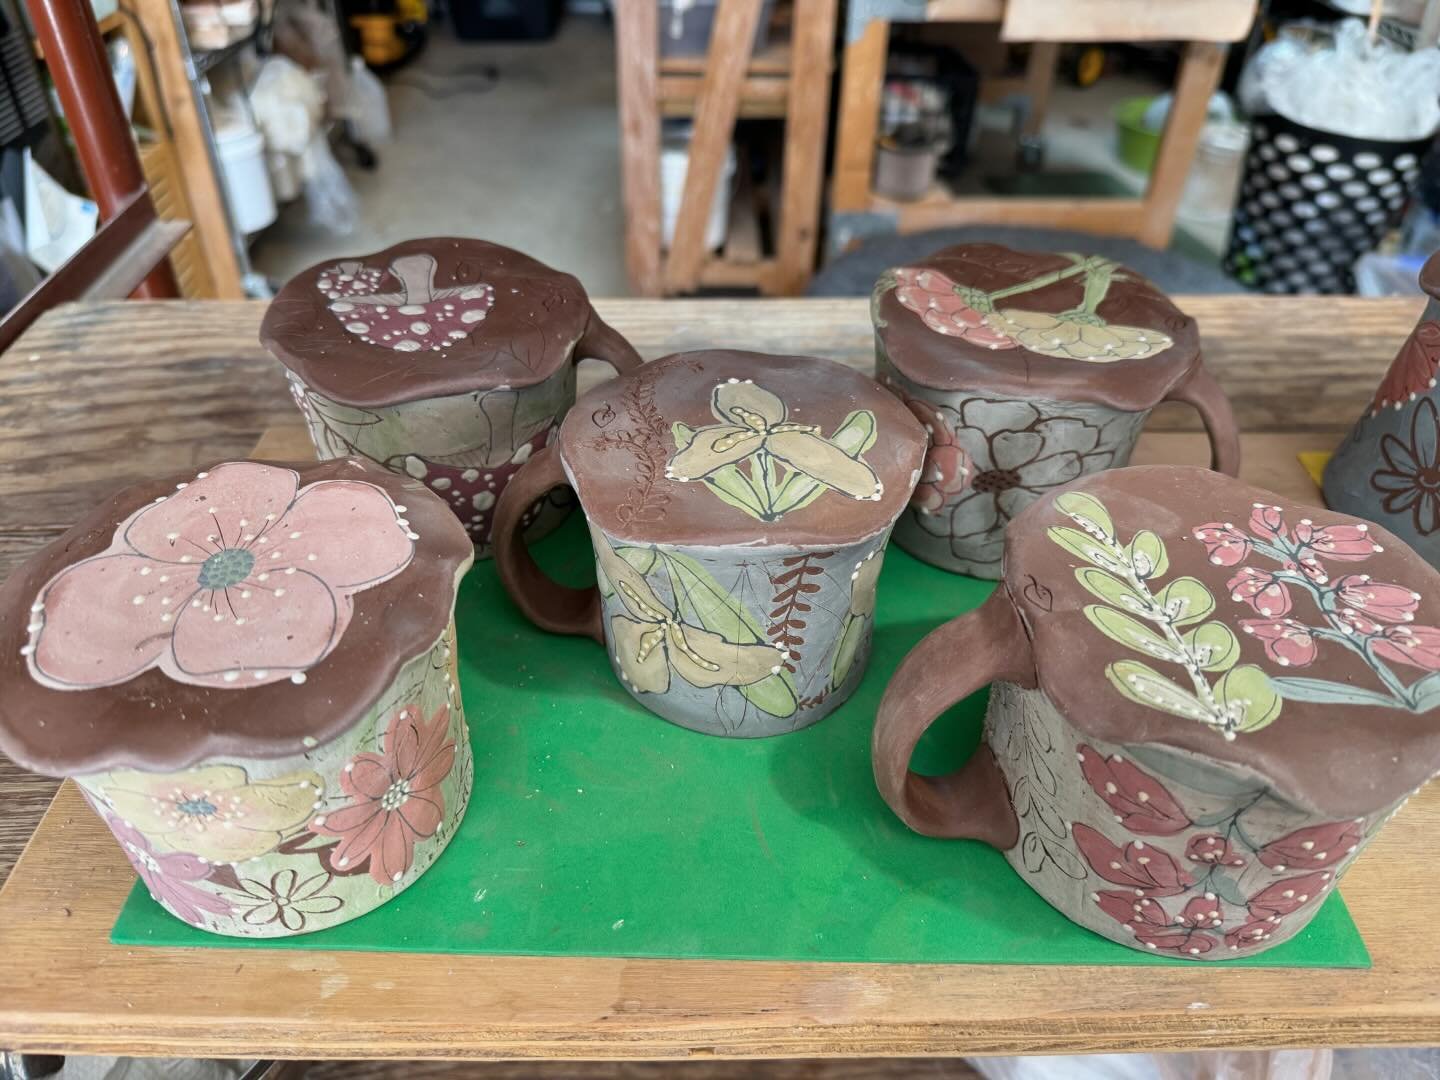 Bottoms up. Mugs and cups drying after layers of decorating. 
@throwntogetherpotters 

Thrown Together Spring Sale is
April 27th, 10-5
1225 Dade St, Charlotte
ONLINE May, 3rd at noon
Guest artist are: Betty McKim, Teresa Piesch and Lara O&rsquo;Keefe